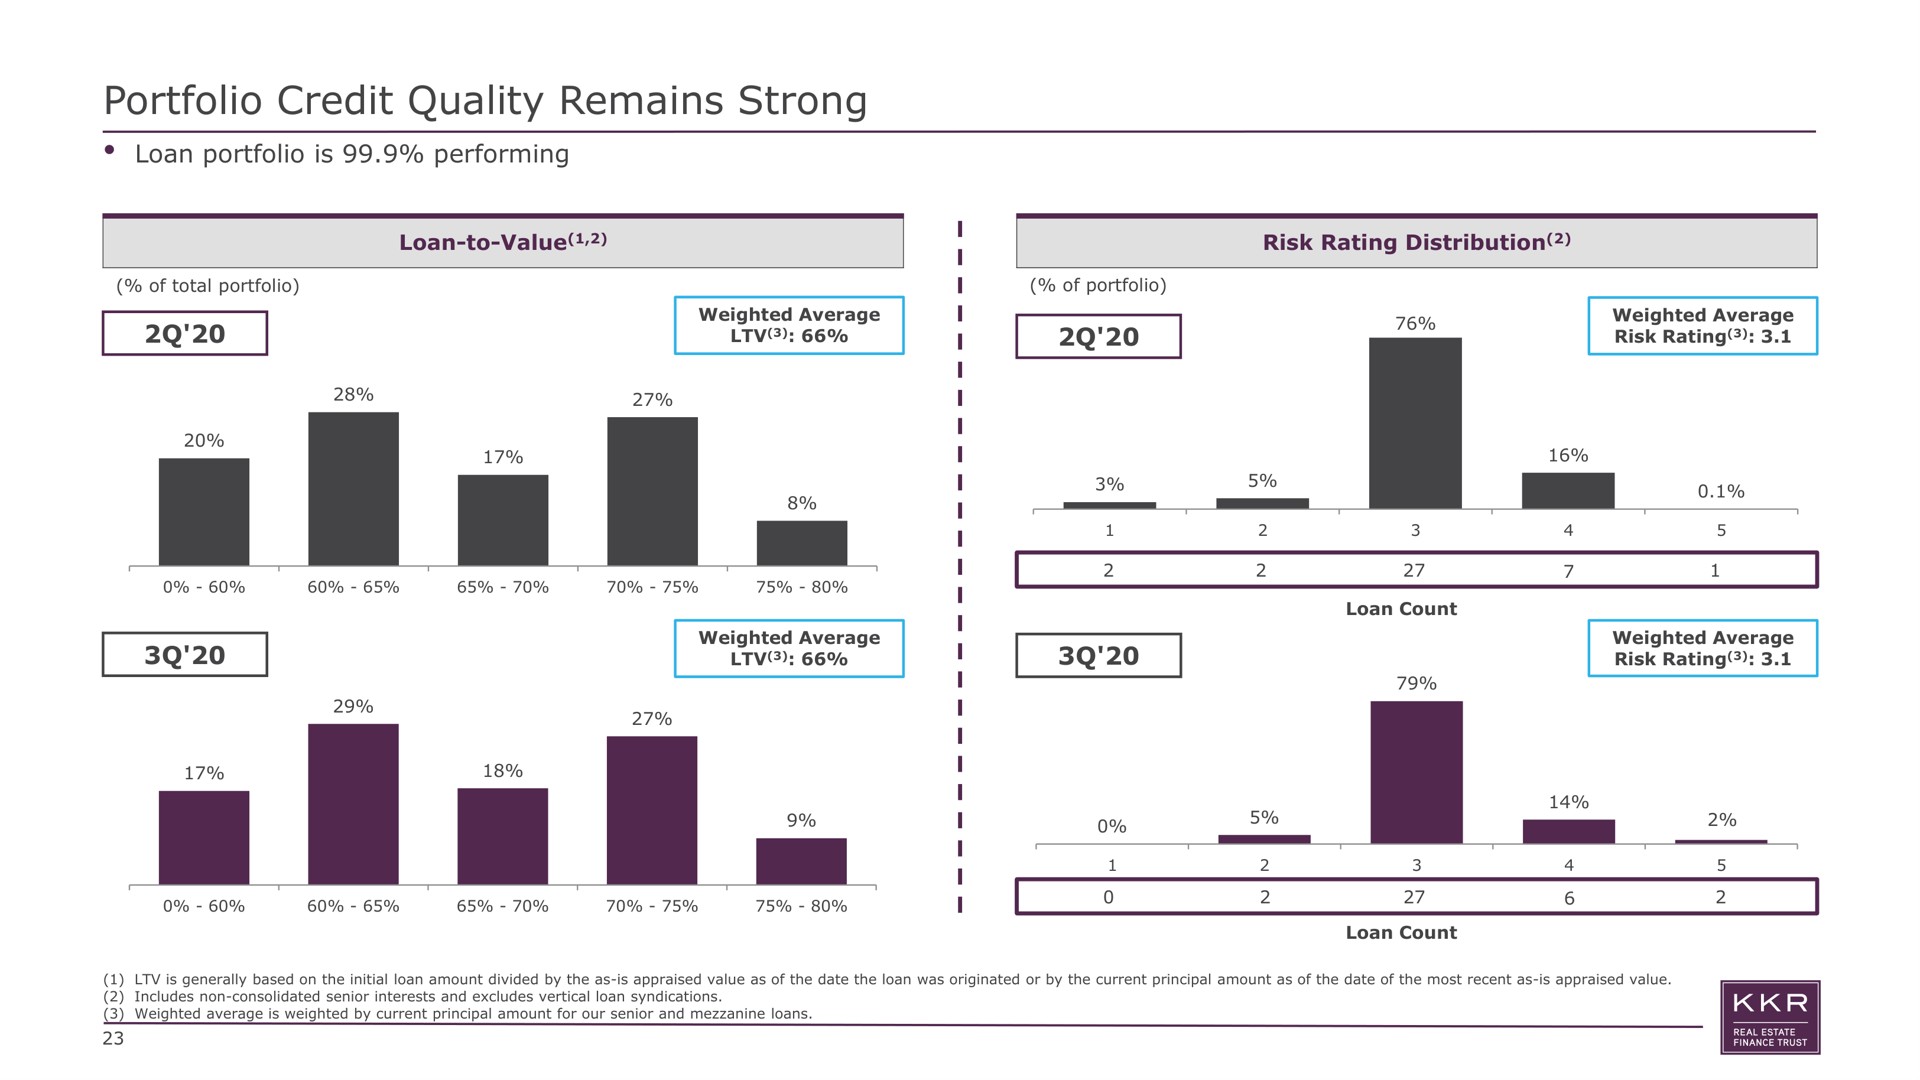 portfolio credit quality remains strong loan is performing | KKR Real Estate Finance Trust